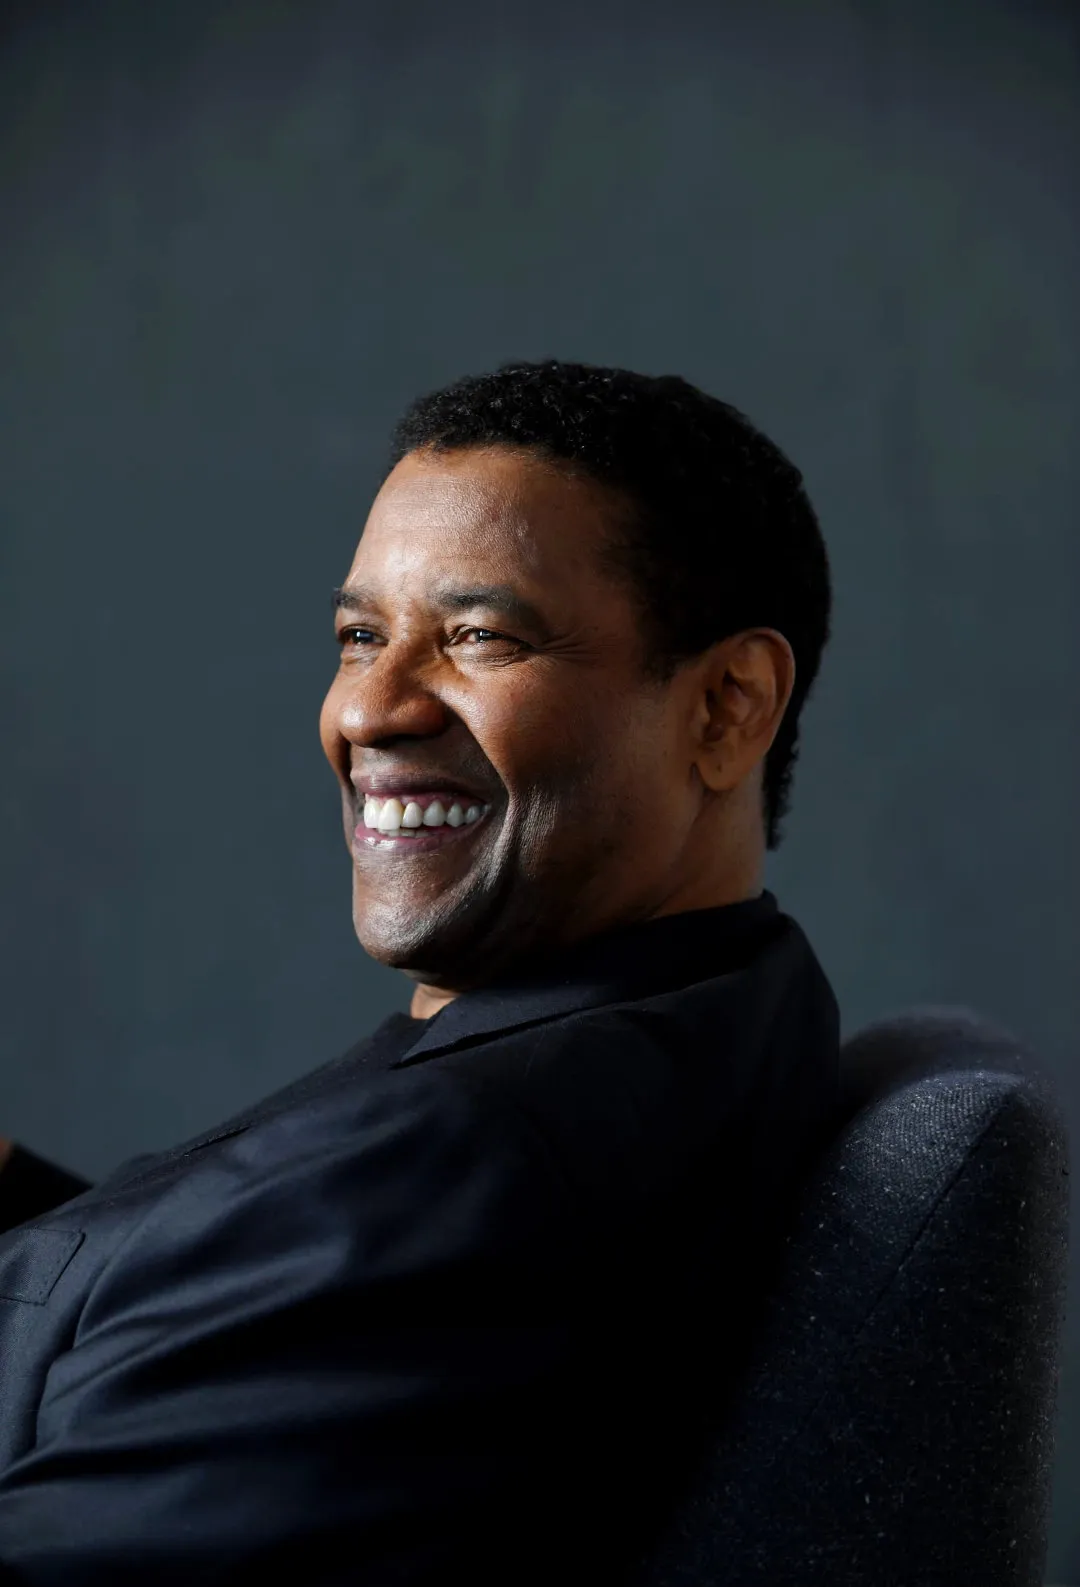 Denzel Washington diagnosed with new crown and miss the "Presidential Medal of freedom" award ceremony | FMV6